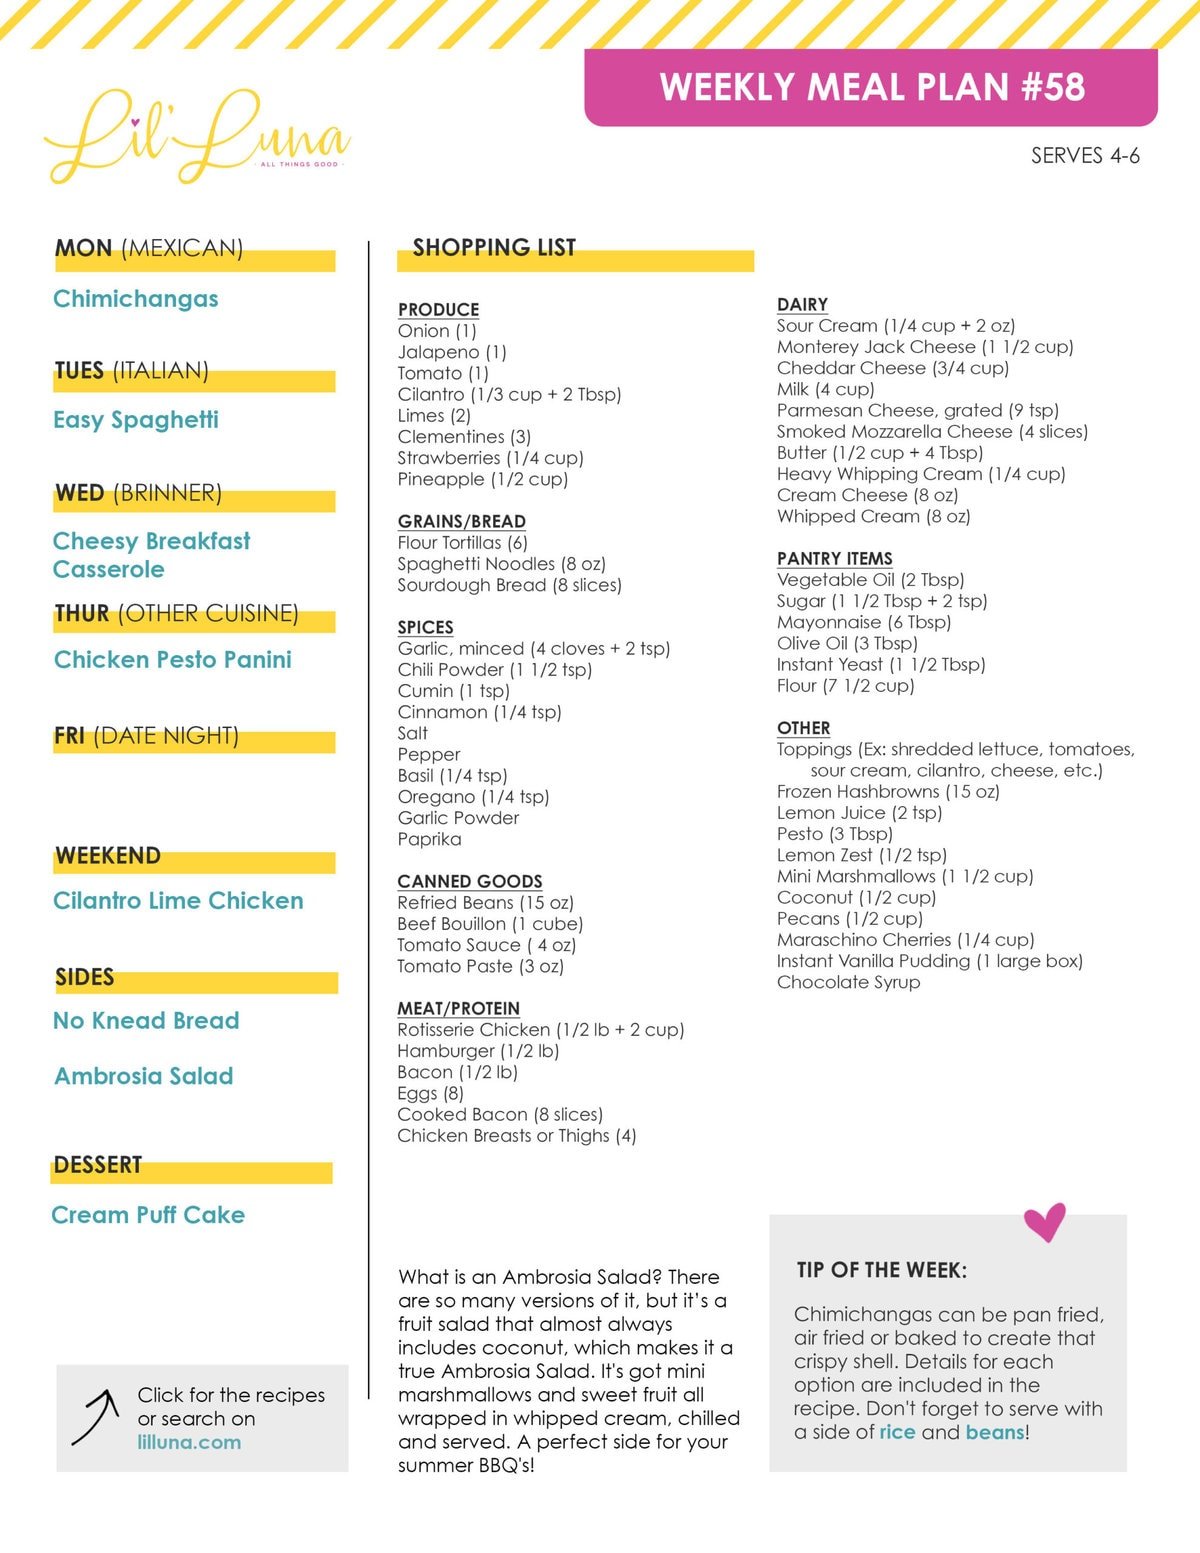 Printable version of Meal Plan #58 with grocery list.